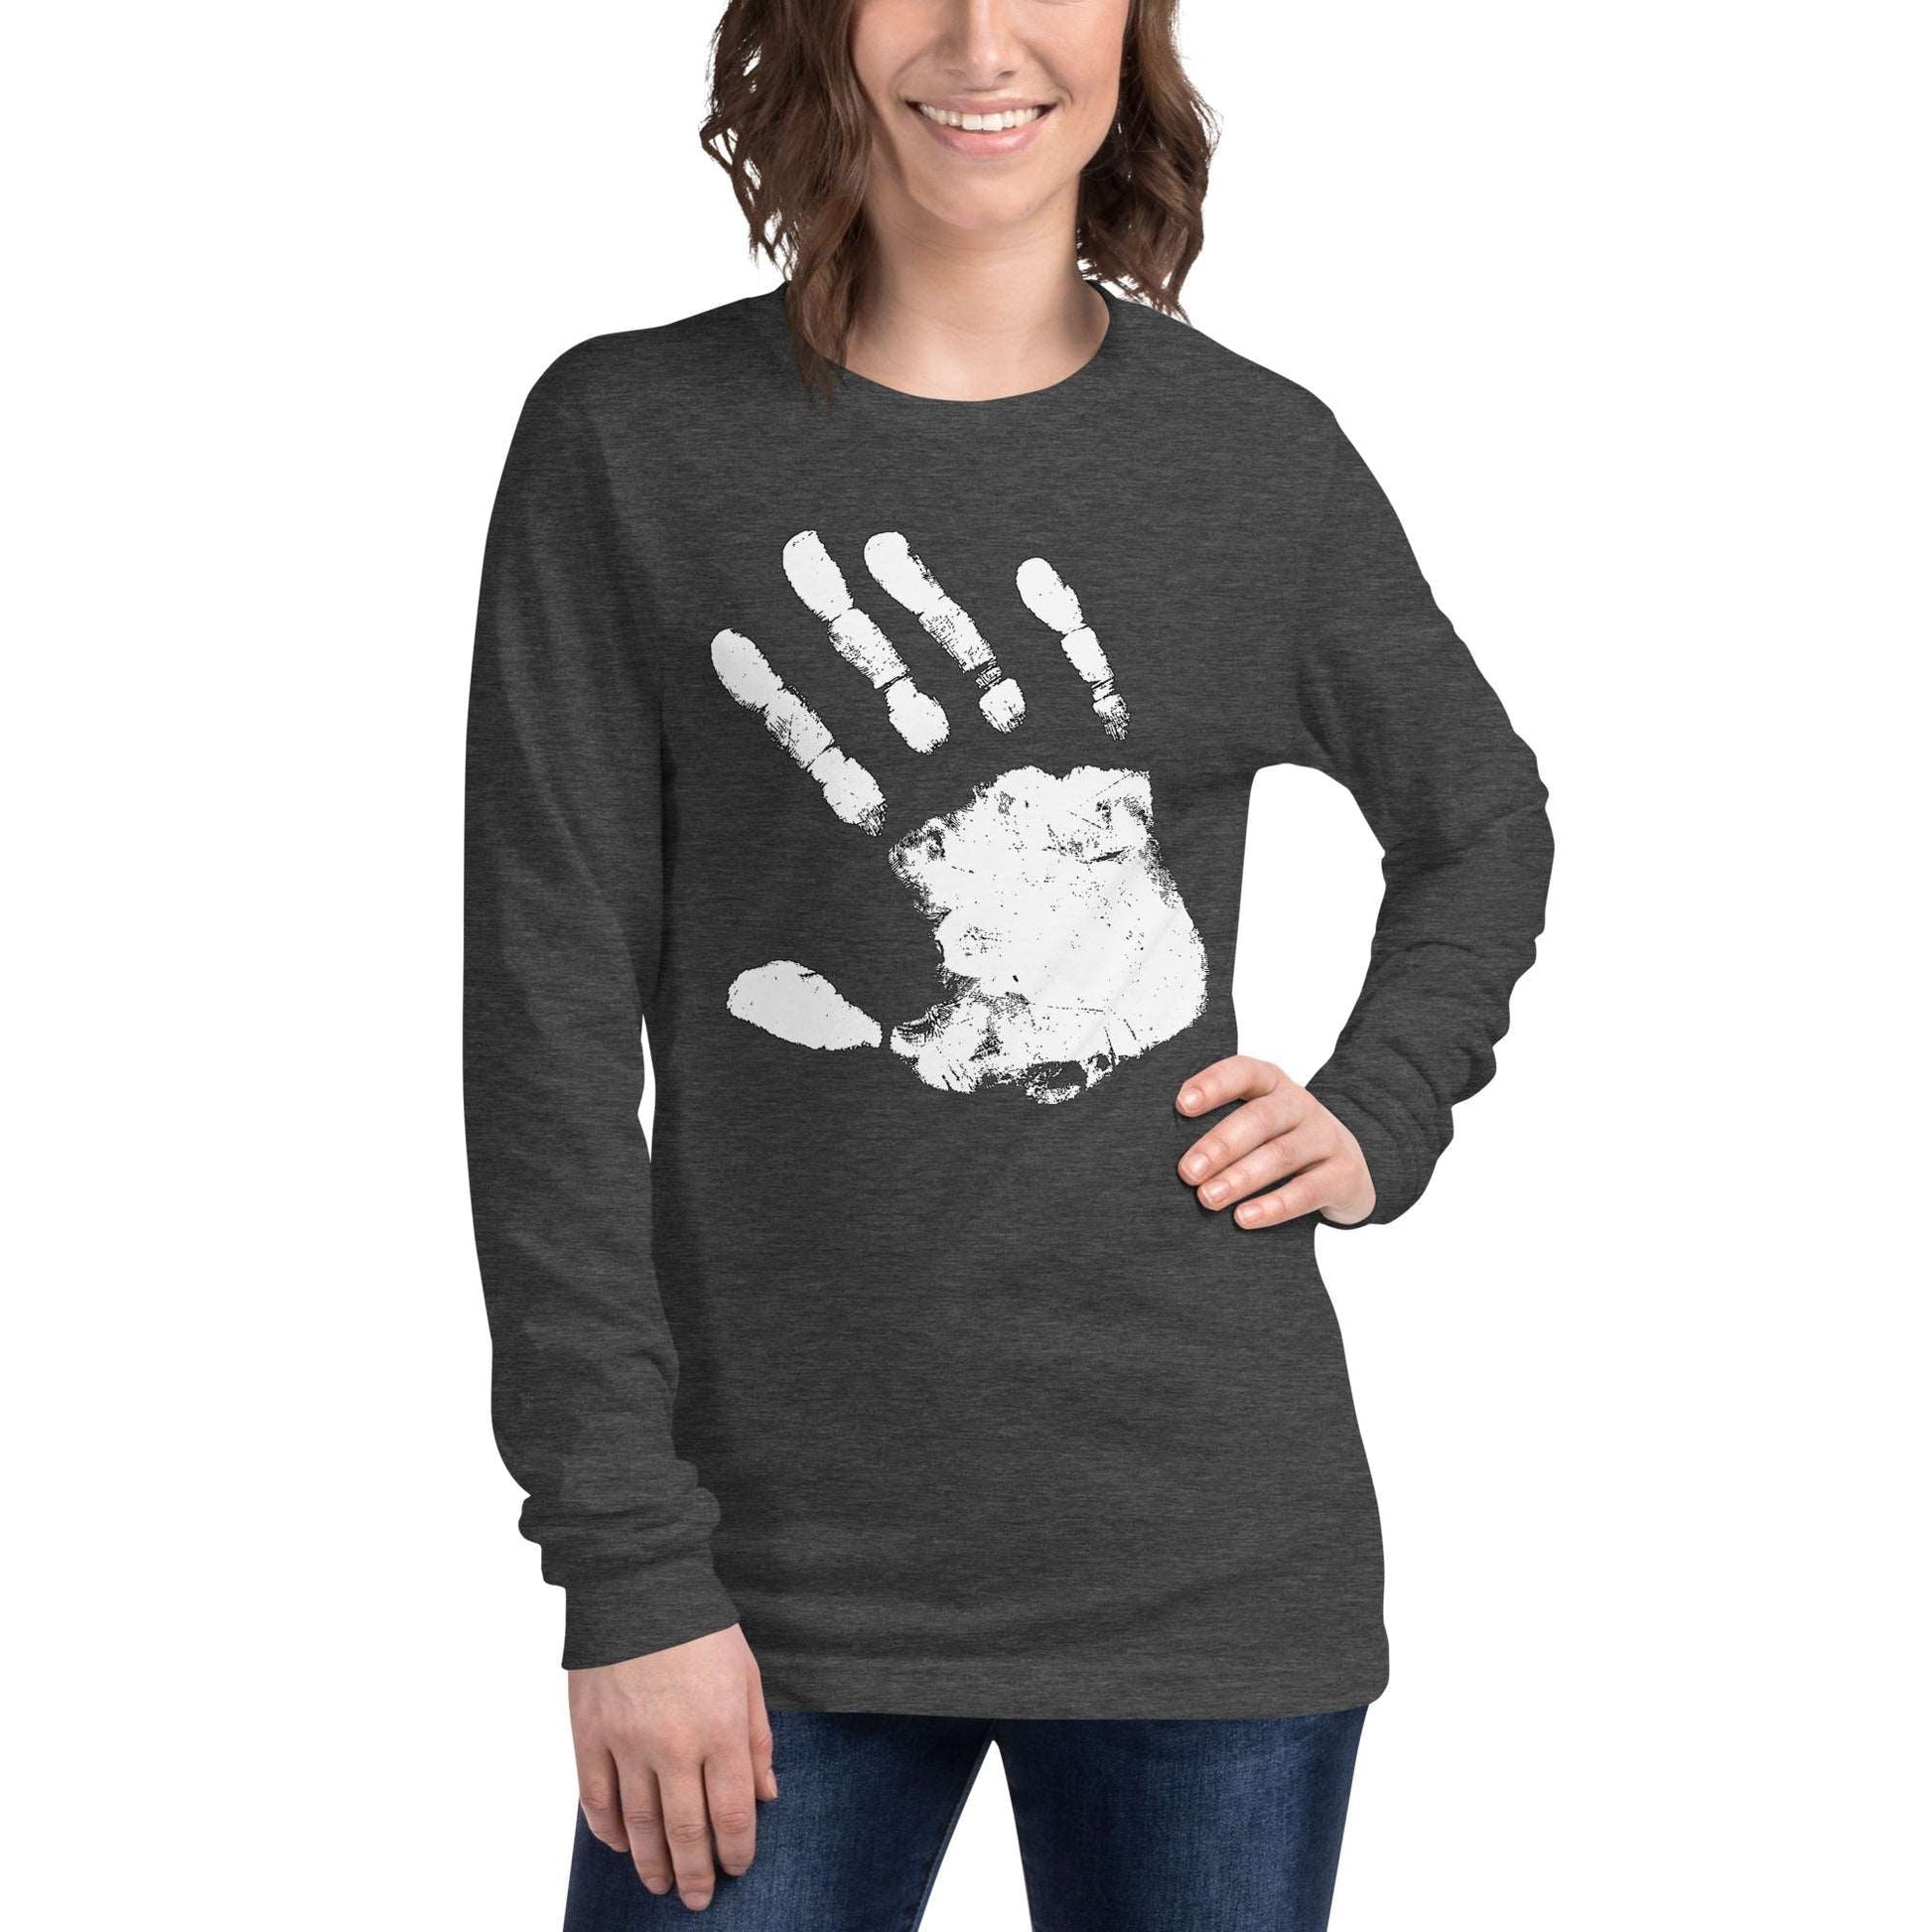 Promises Project - Unisex Long Sleeve Tee - Souled Out World